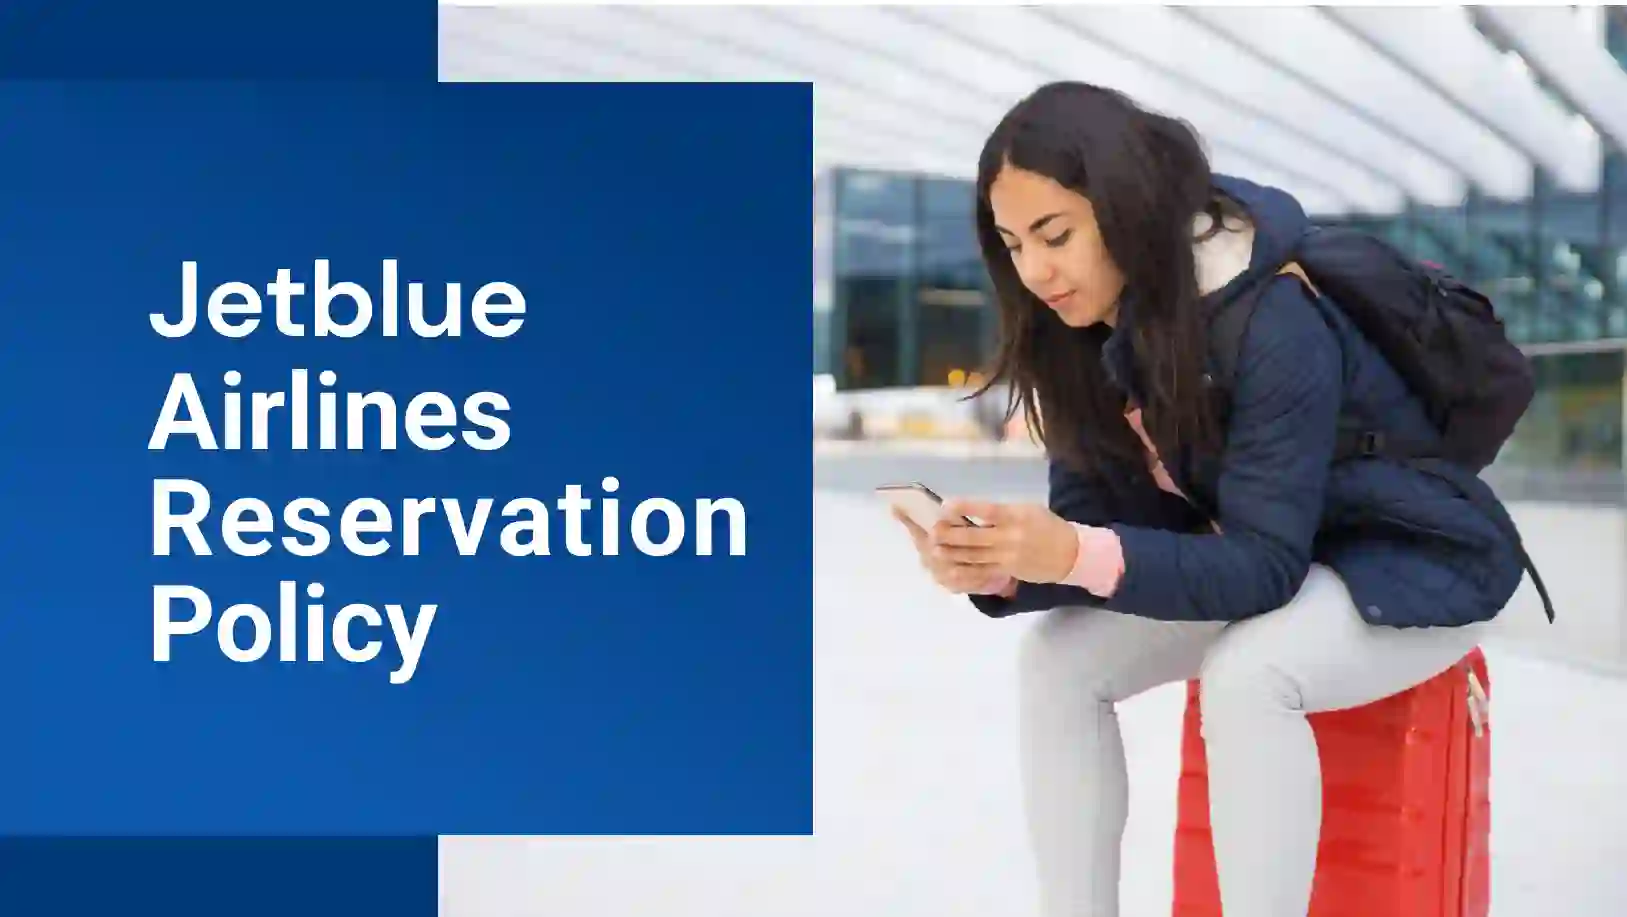 JetBlue Airlines Reservation Policy online